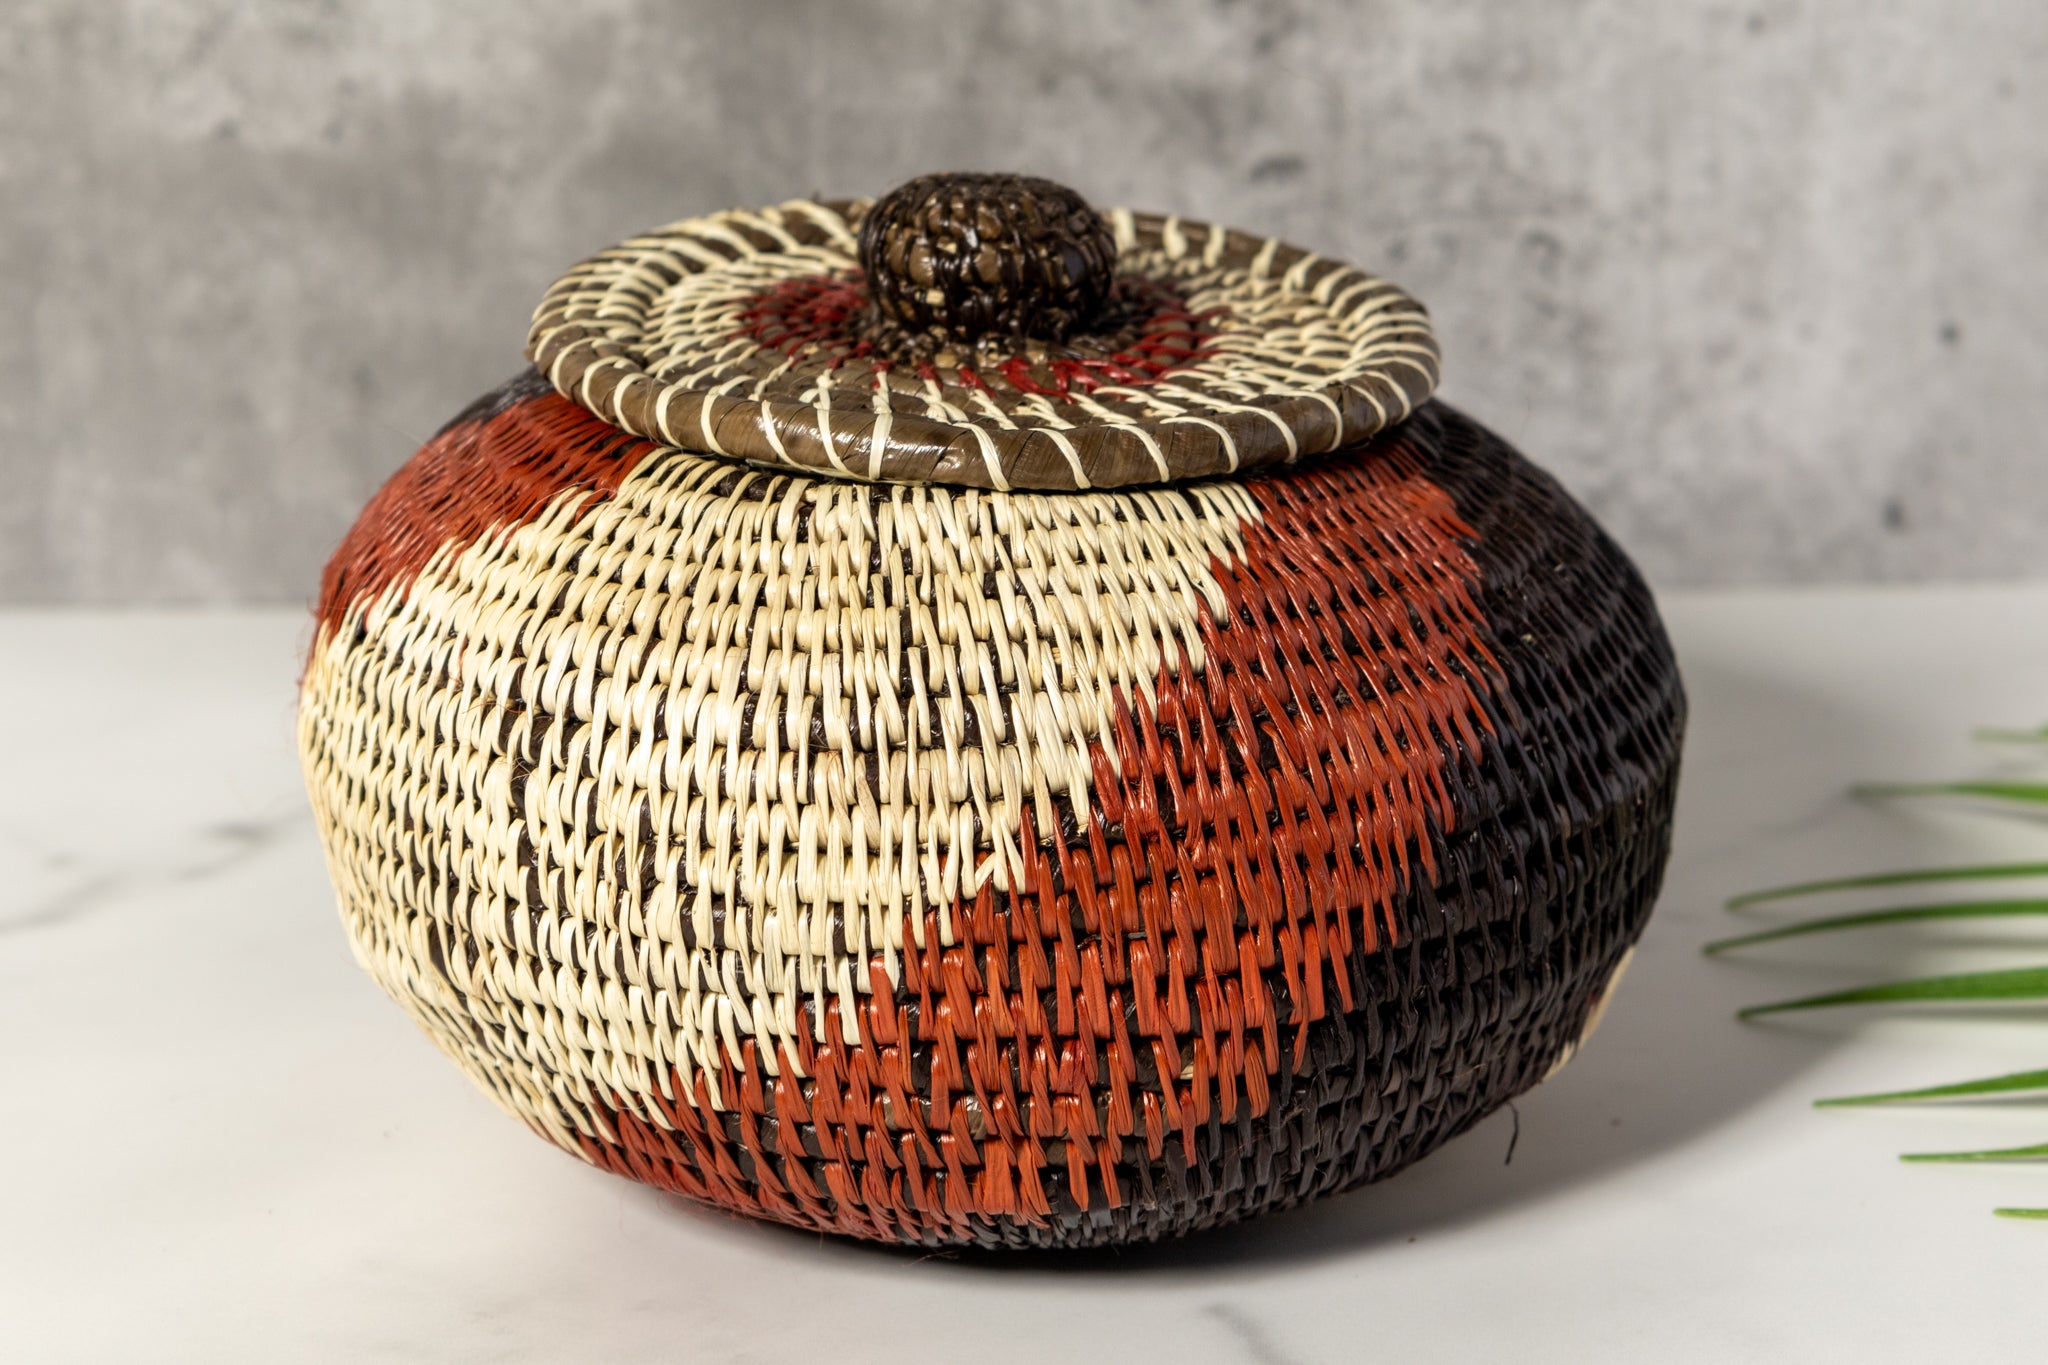 Brown White And Black Woven Basket With Top